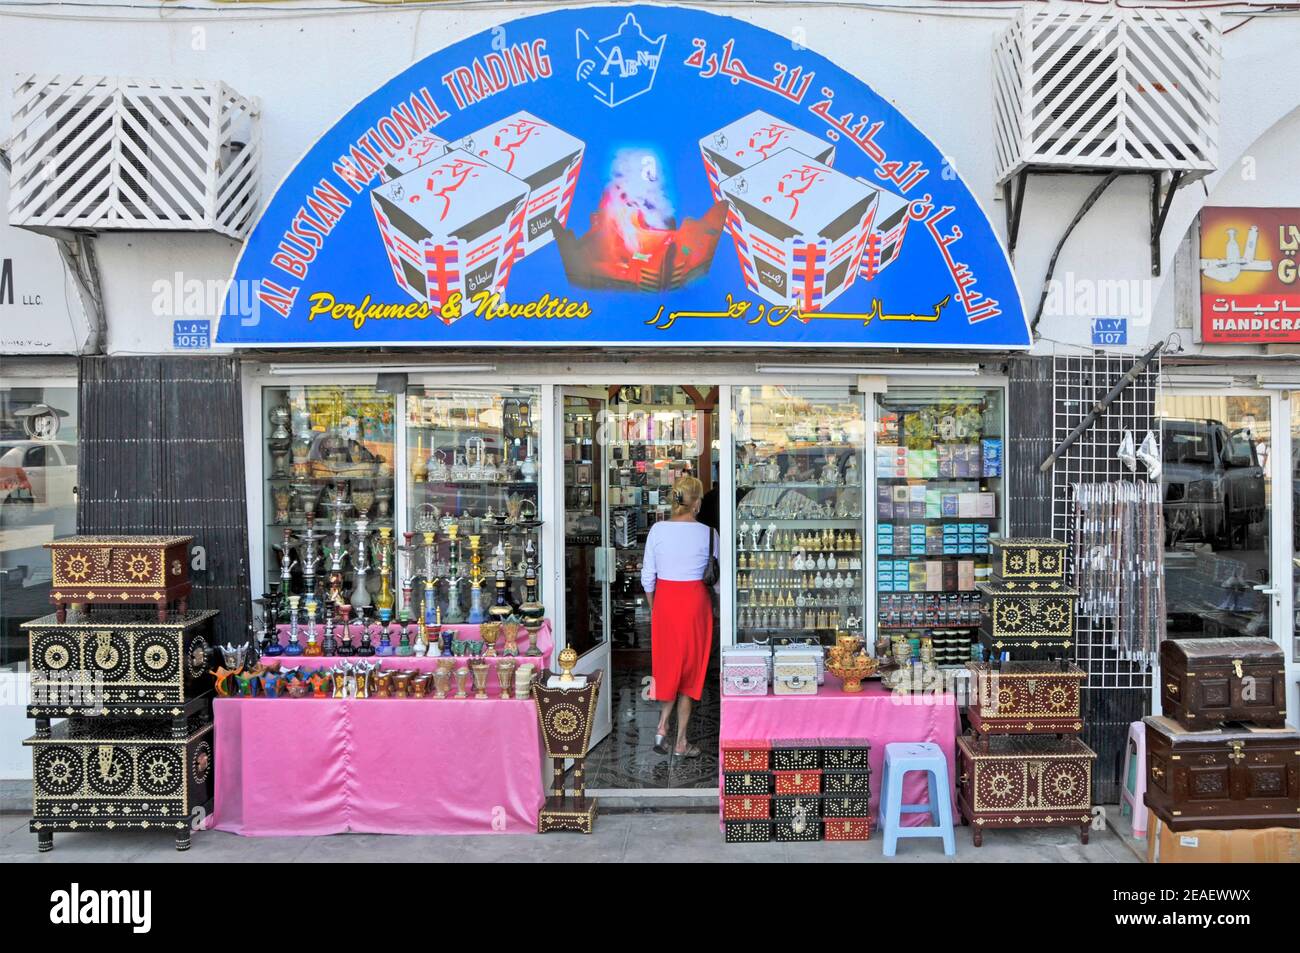 Store window & merchandise back view of woman entering a shop front selling perfumes & novelties on corniche road in Mutrah Muscat  Oman Middle East Stock Photo